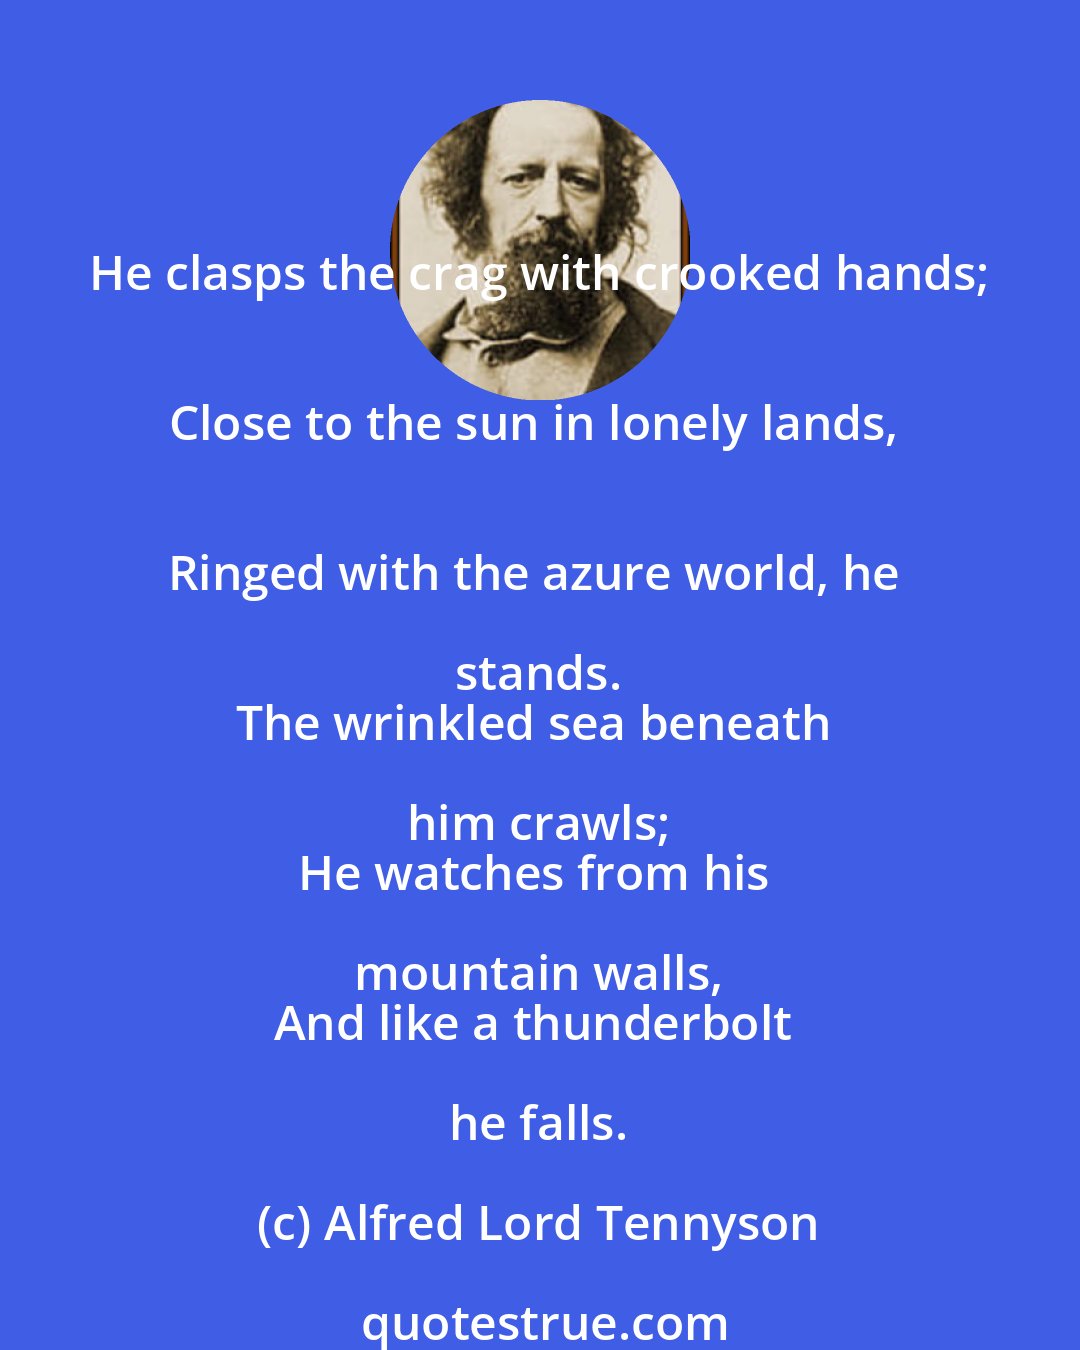 Alfred Lord Tennyson: He clasps the crag with crooked hands; 
Close to the sun in lonely lands, 
Ringed with the azure world, he stands. 
The wrinkled sea beneath him crawls; 
He watches from his mountain walls, 
And like a thunderbolt he falls.